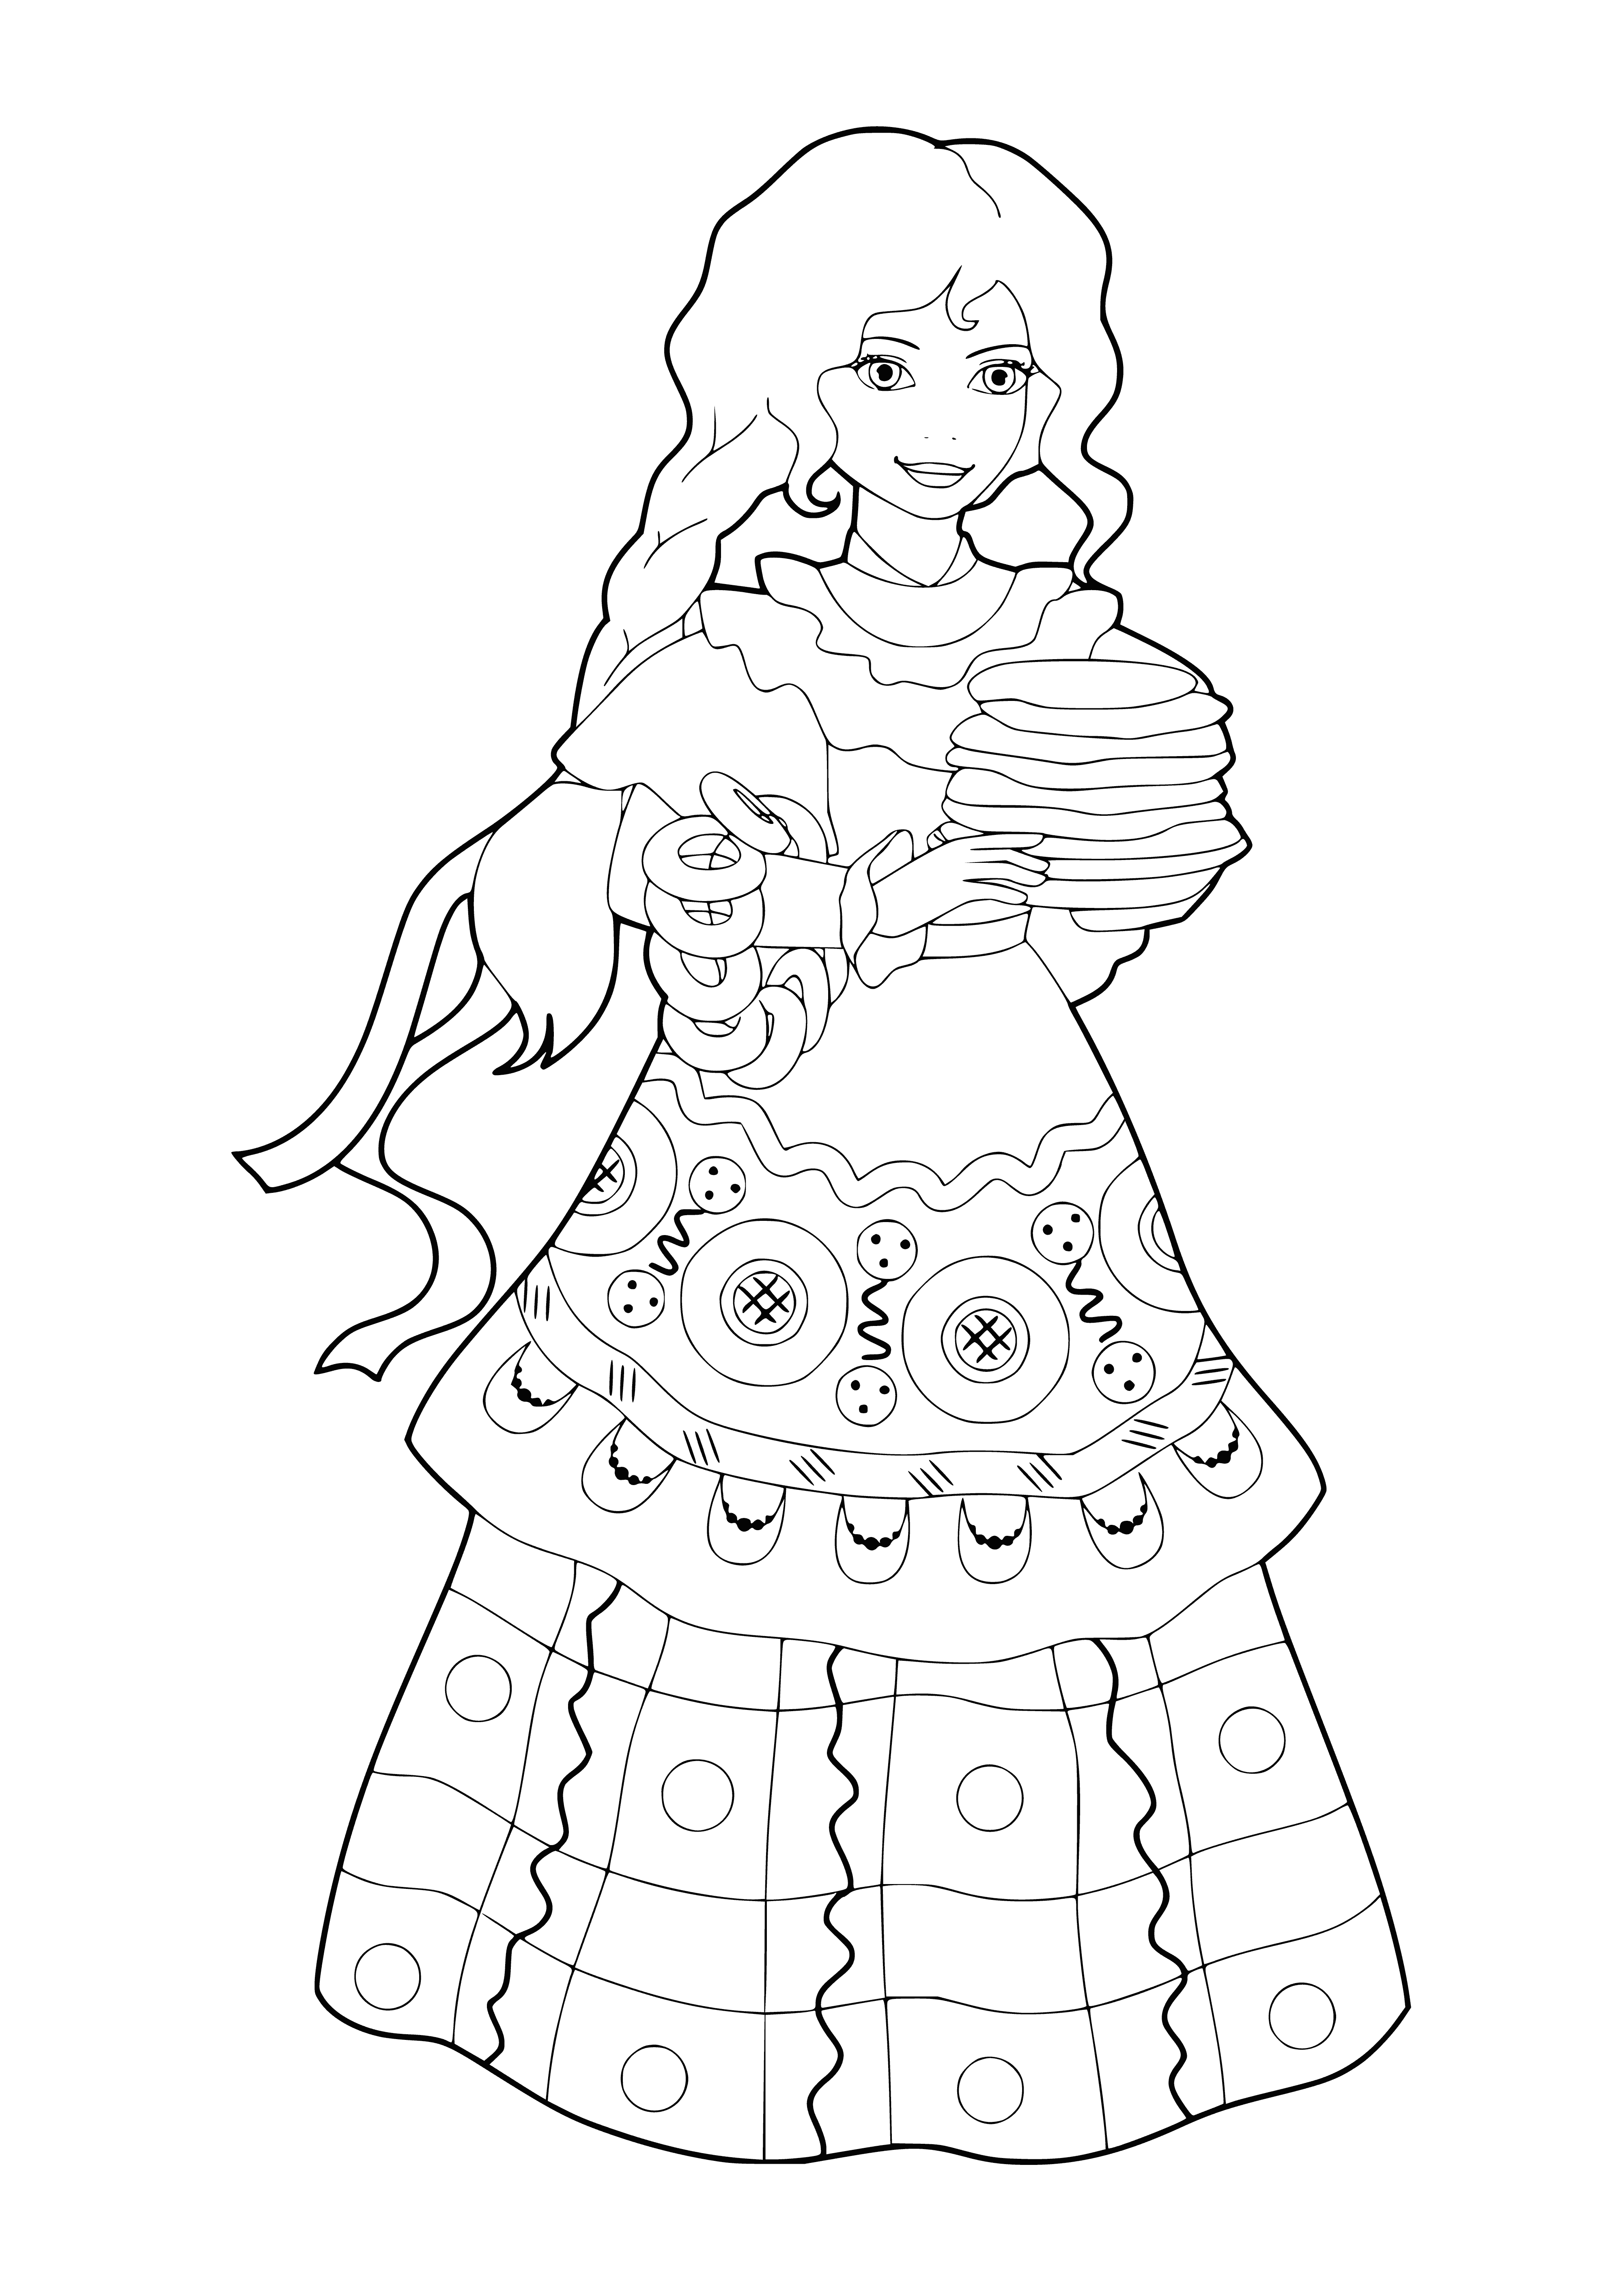 coloring page: Women with beautiful long hair, colorful outfits and flowers in their hair smile at the camera.